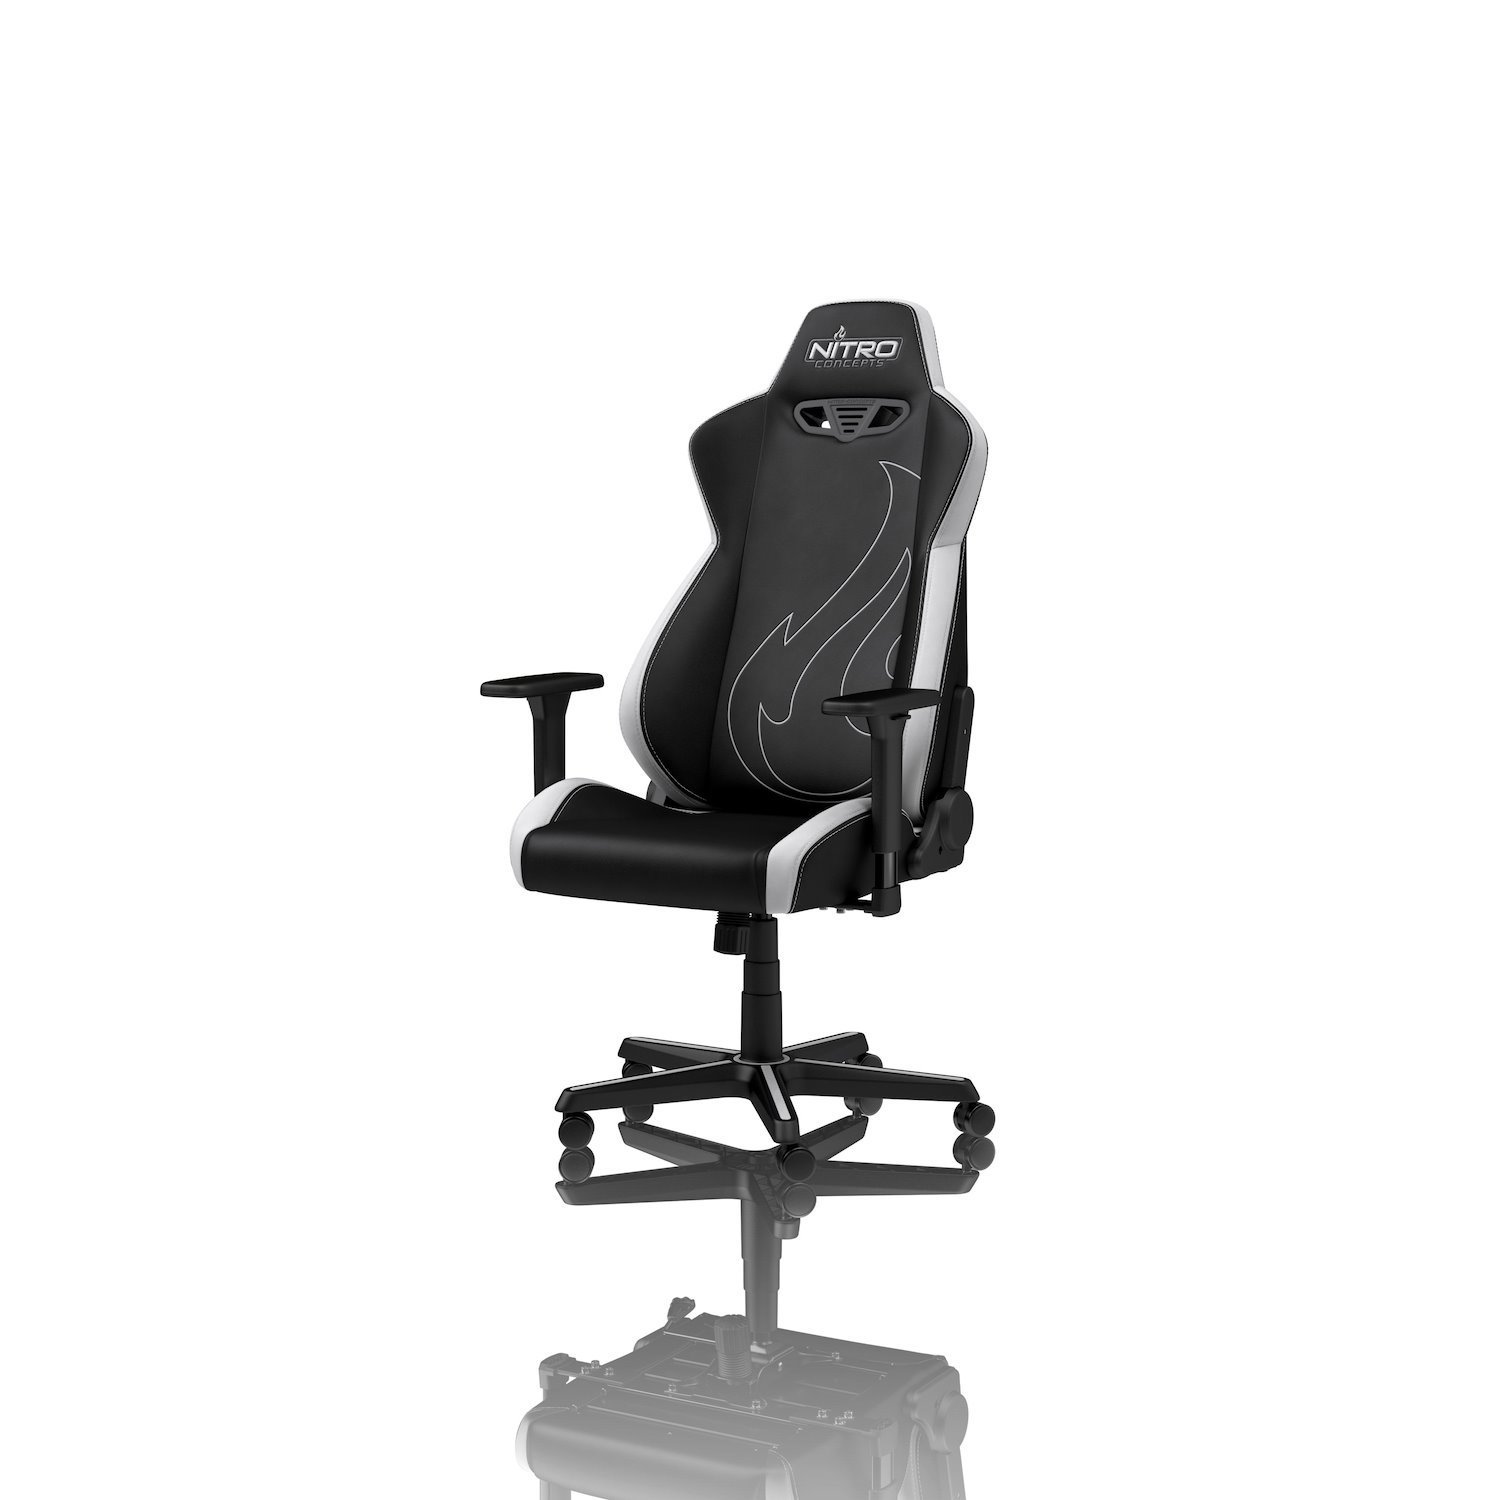 Nitro Concepts S300 Ex Universal Gaming Chair Upholstered Padded Seat Black White (Nitro Concepts S300 Ex Gaming Chair - Radiant White)